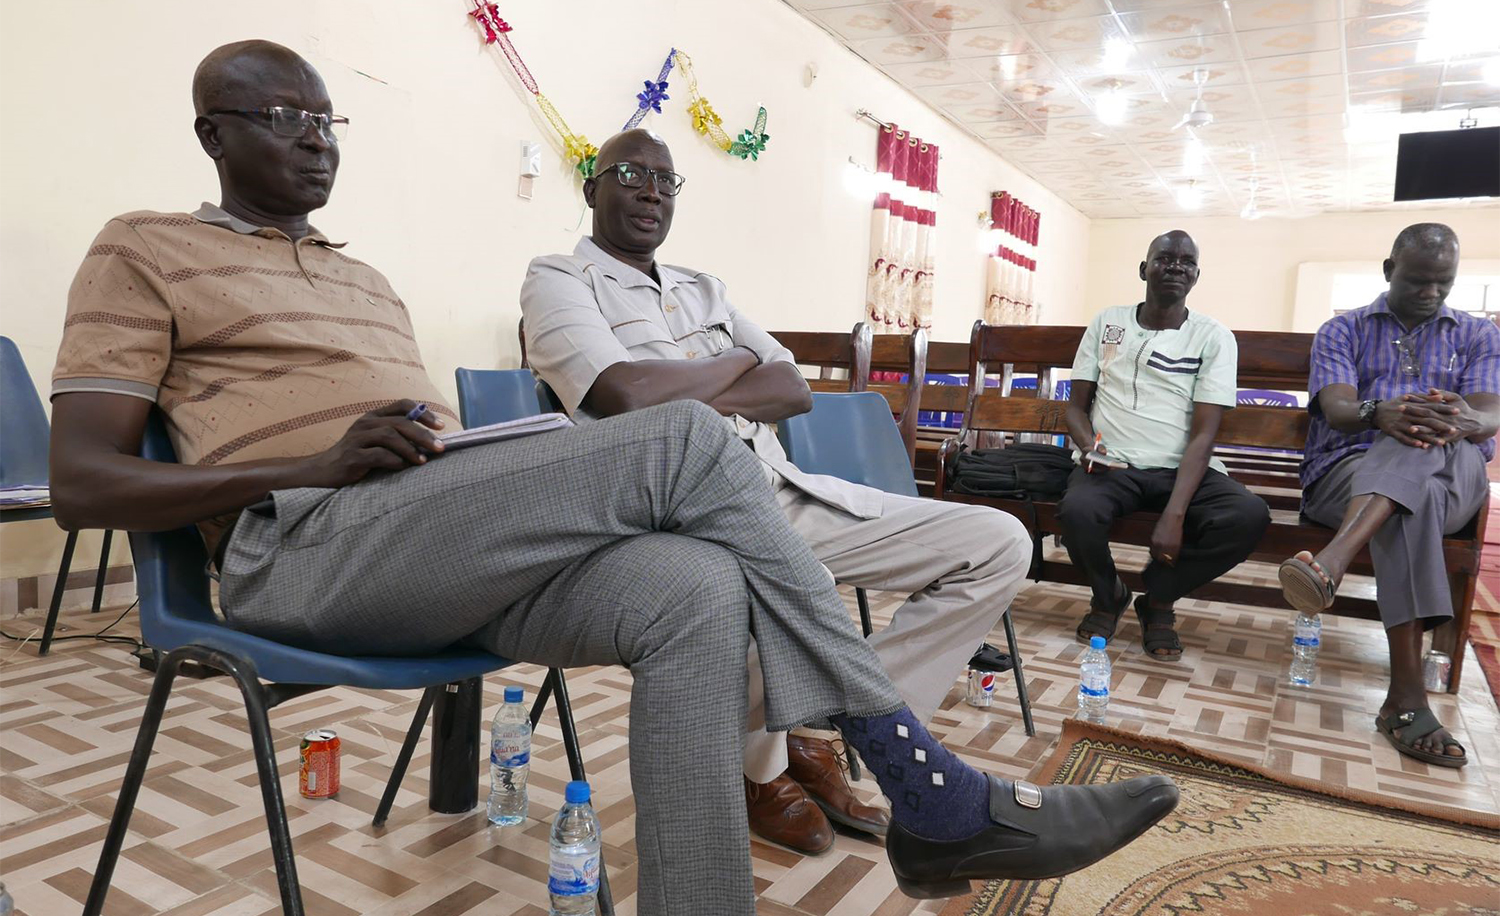 Participants from meeting with South Sudanese Presbyterian Evangelical Church, February 6.